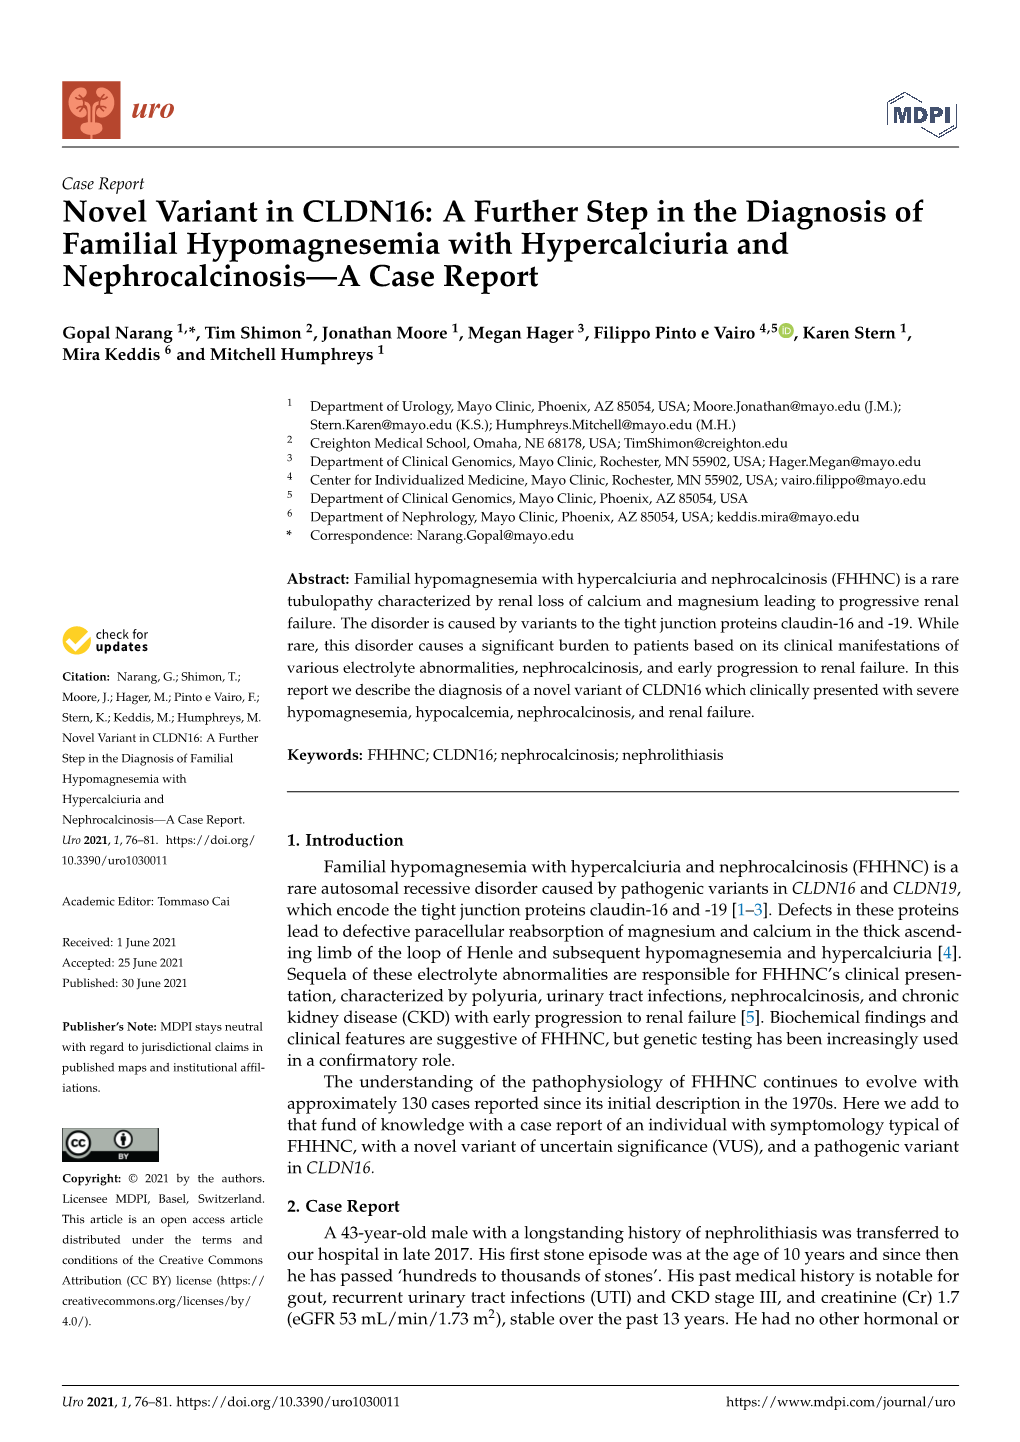 Novel Variant in CLDN16: a Further Step in the Diagnosis of Familial Hypomagnesemia with Hypercalciuria and Nephrocalcinosis—A Case Report